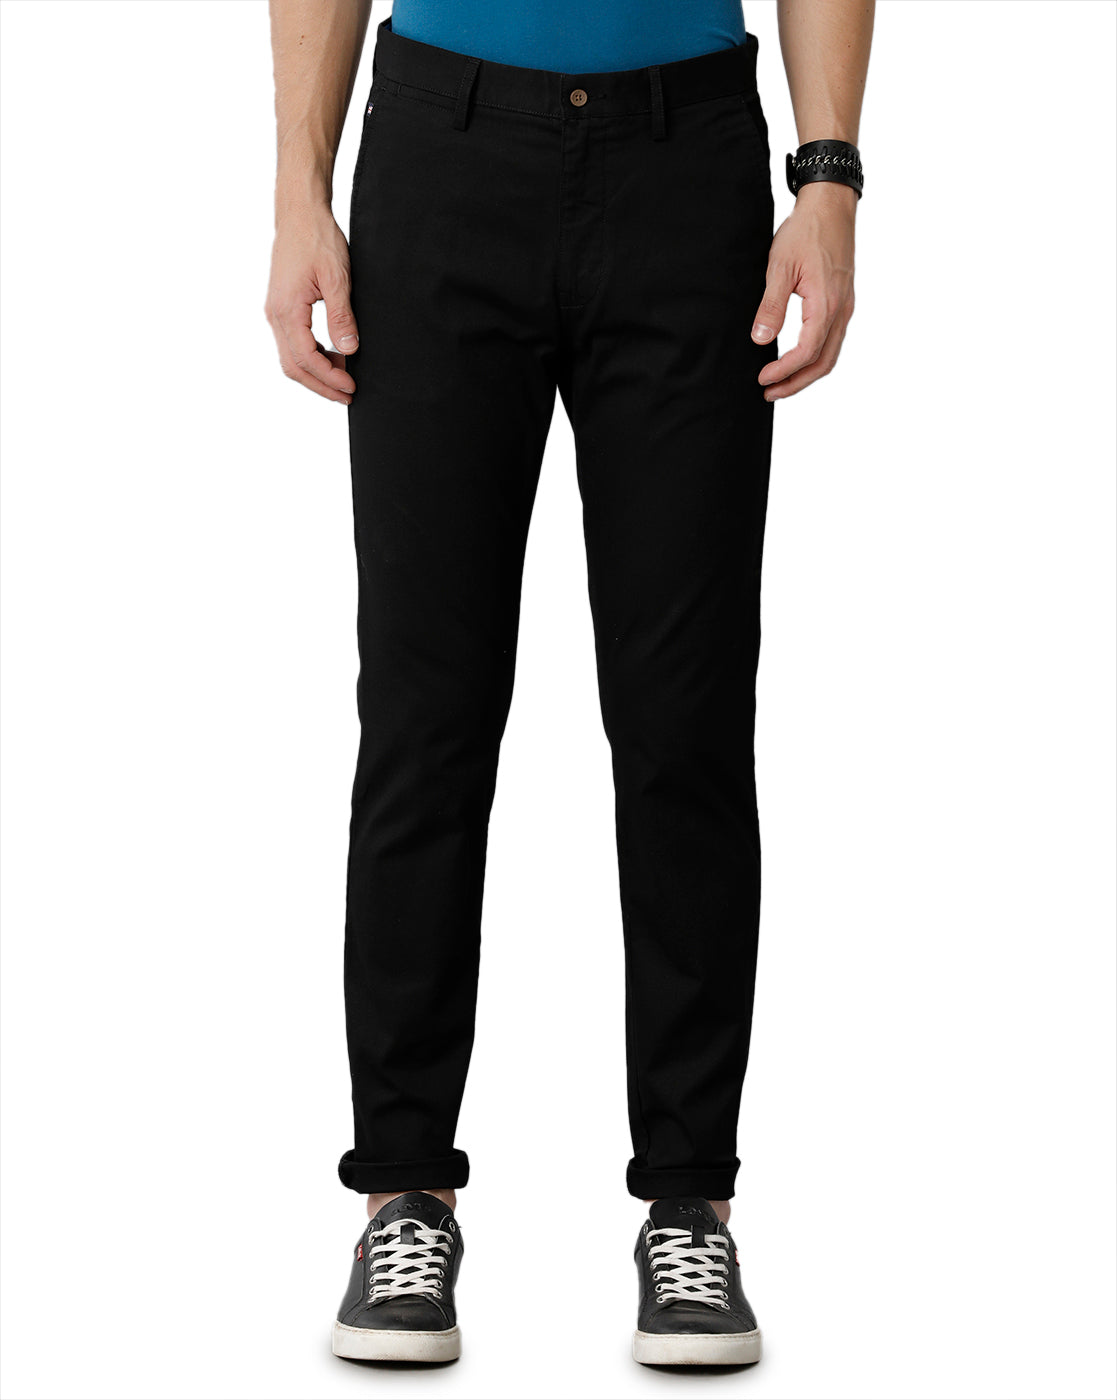 Black Dobby Solid Casual Cotton Trouser - Double Two